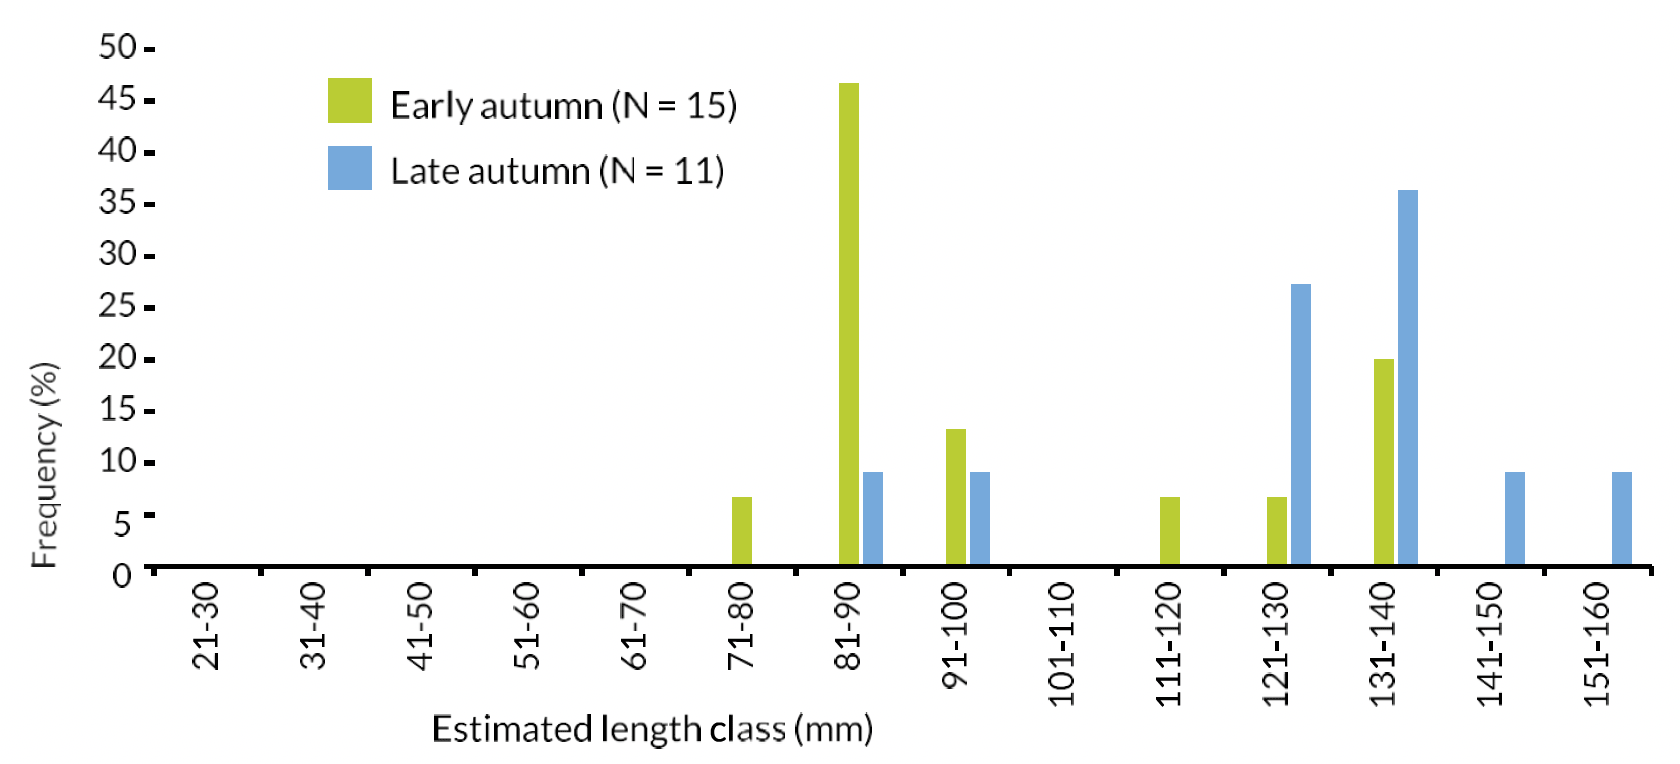 Bar chart of estimated Salmon length frequency distribution from the stomach contents of River Tweed Cormorant early autumn (Sep-Oct 2019) sample and late autumn (Nov 2019) sample